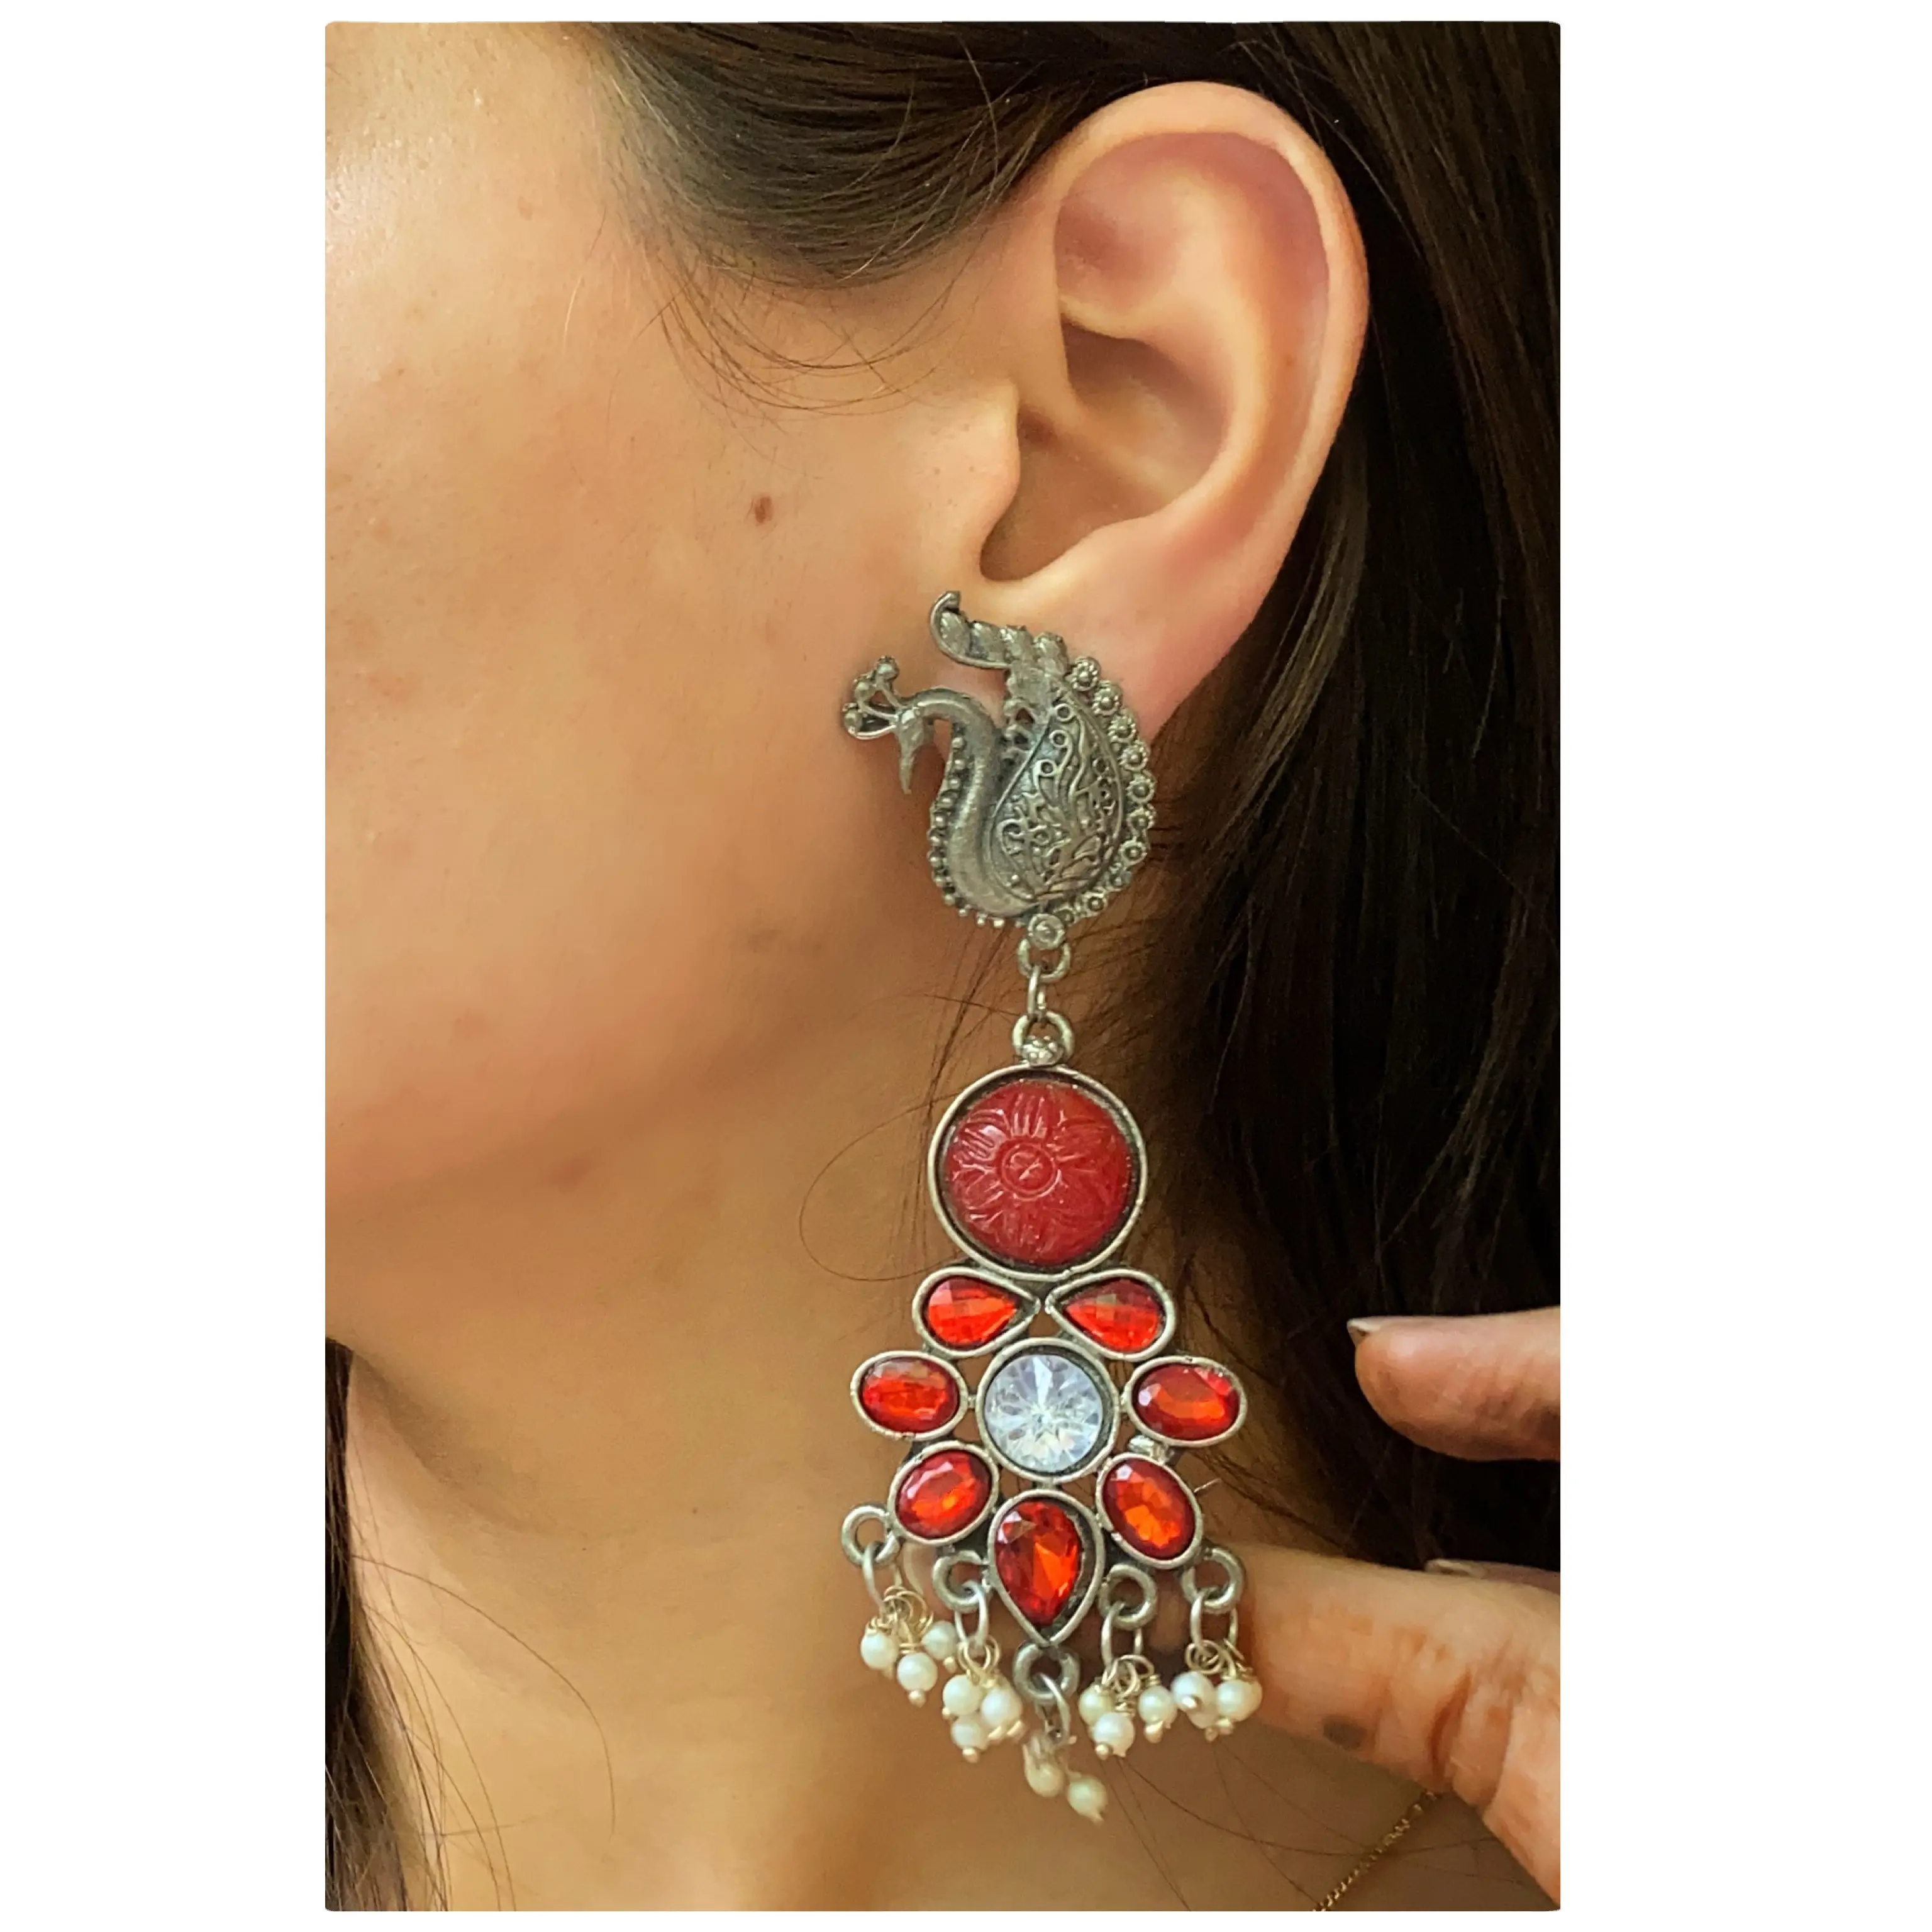 Most Selling New Design German Silver Jhumkas for Womens Available at Affordable Price from Indian Exporter Earrings Manufacture